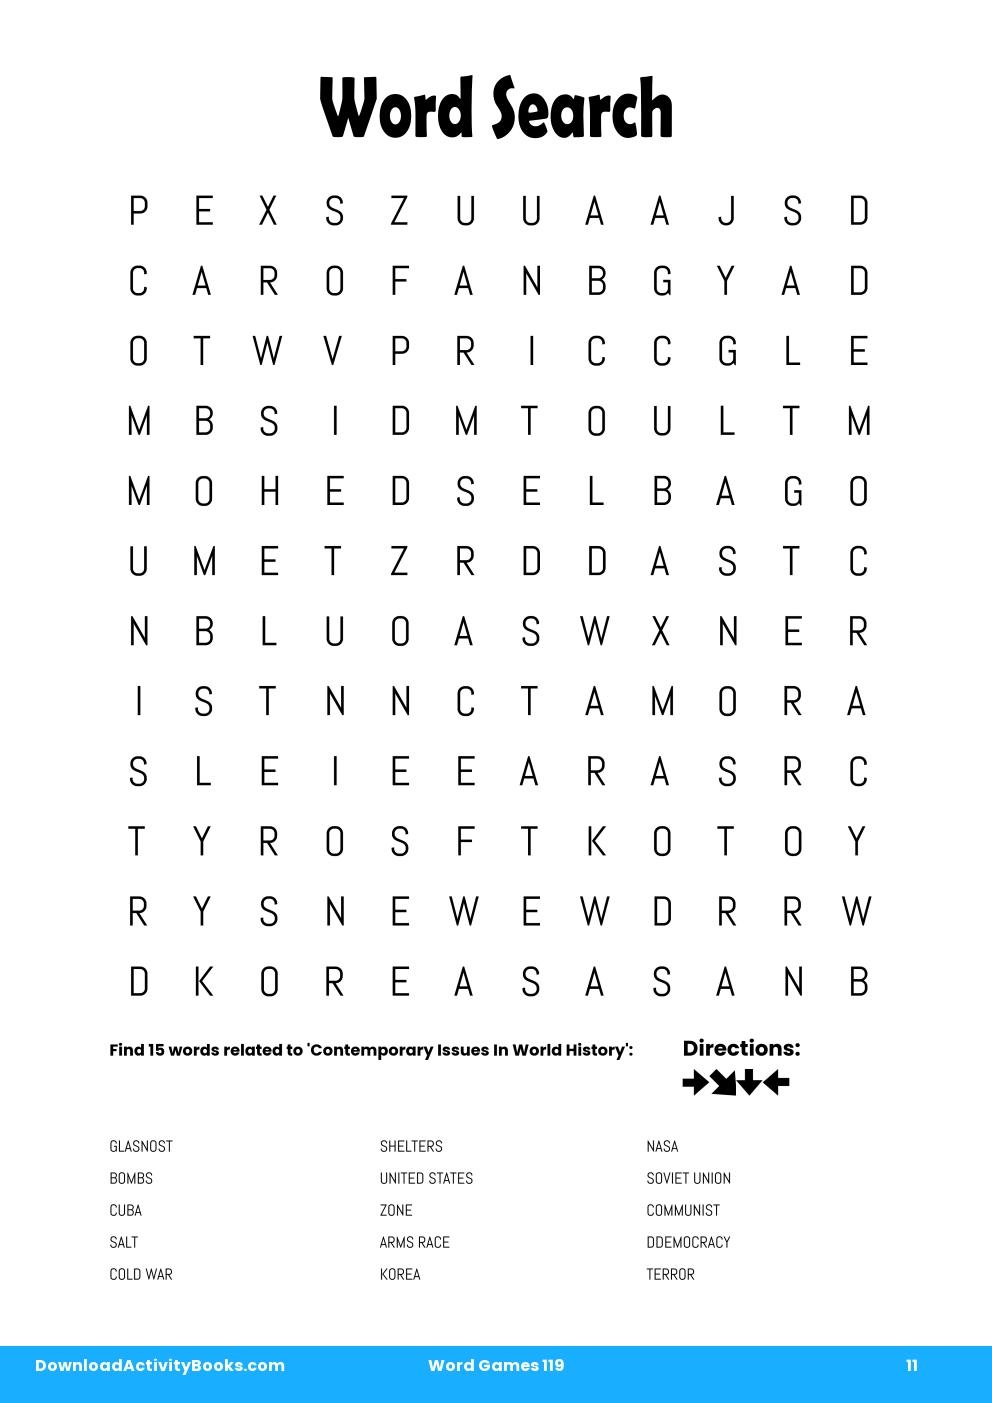 Word Search in Word Games 119